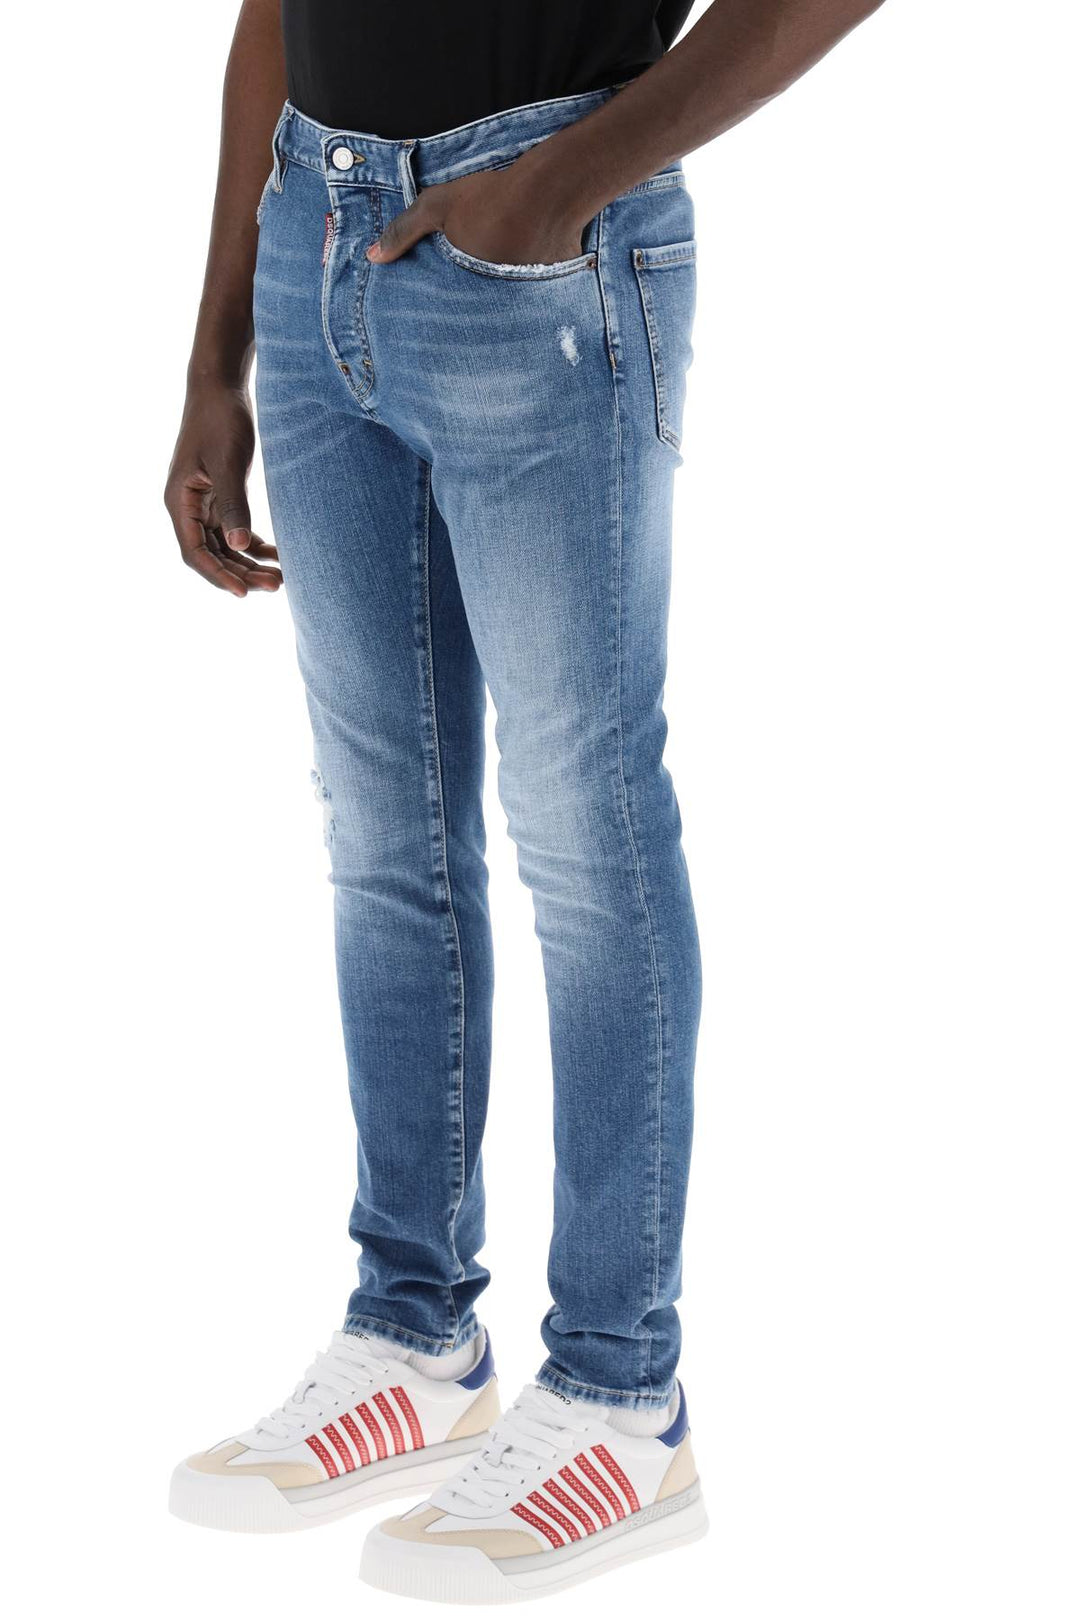 Dsquared2 "medium preppy wash cool guy jeans for-3